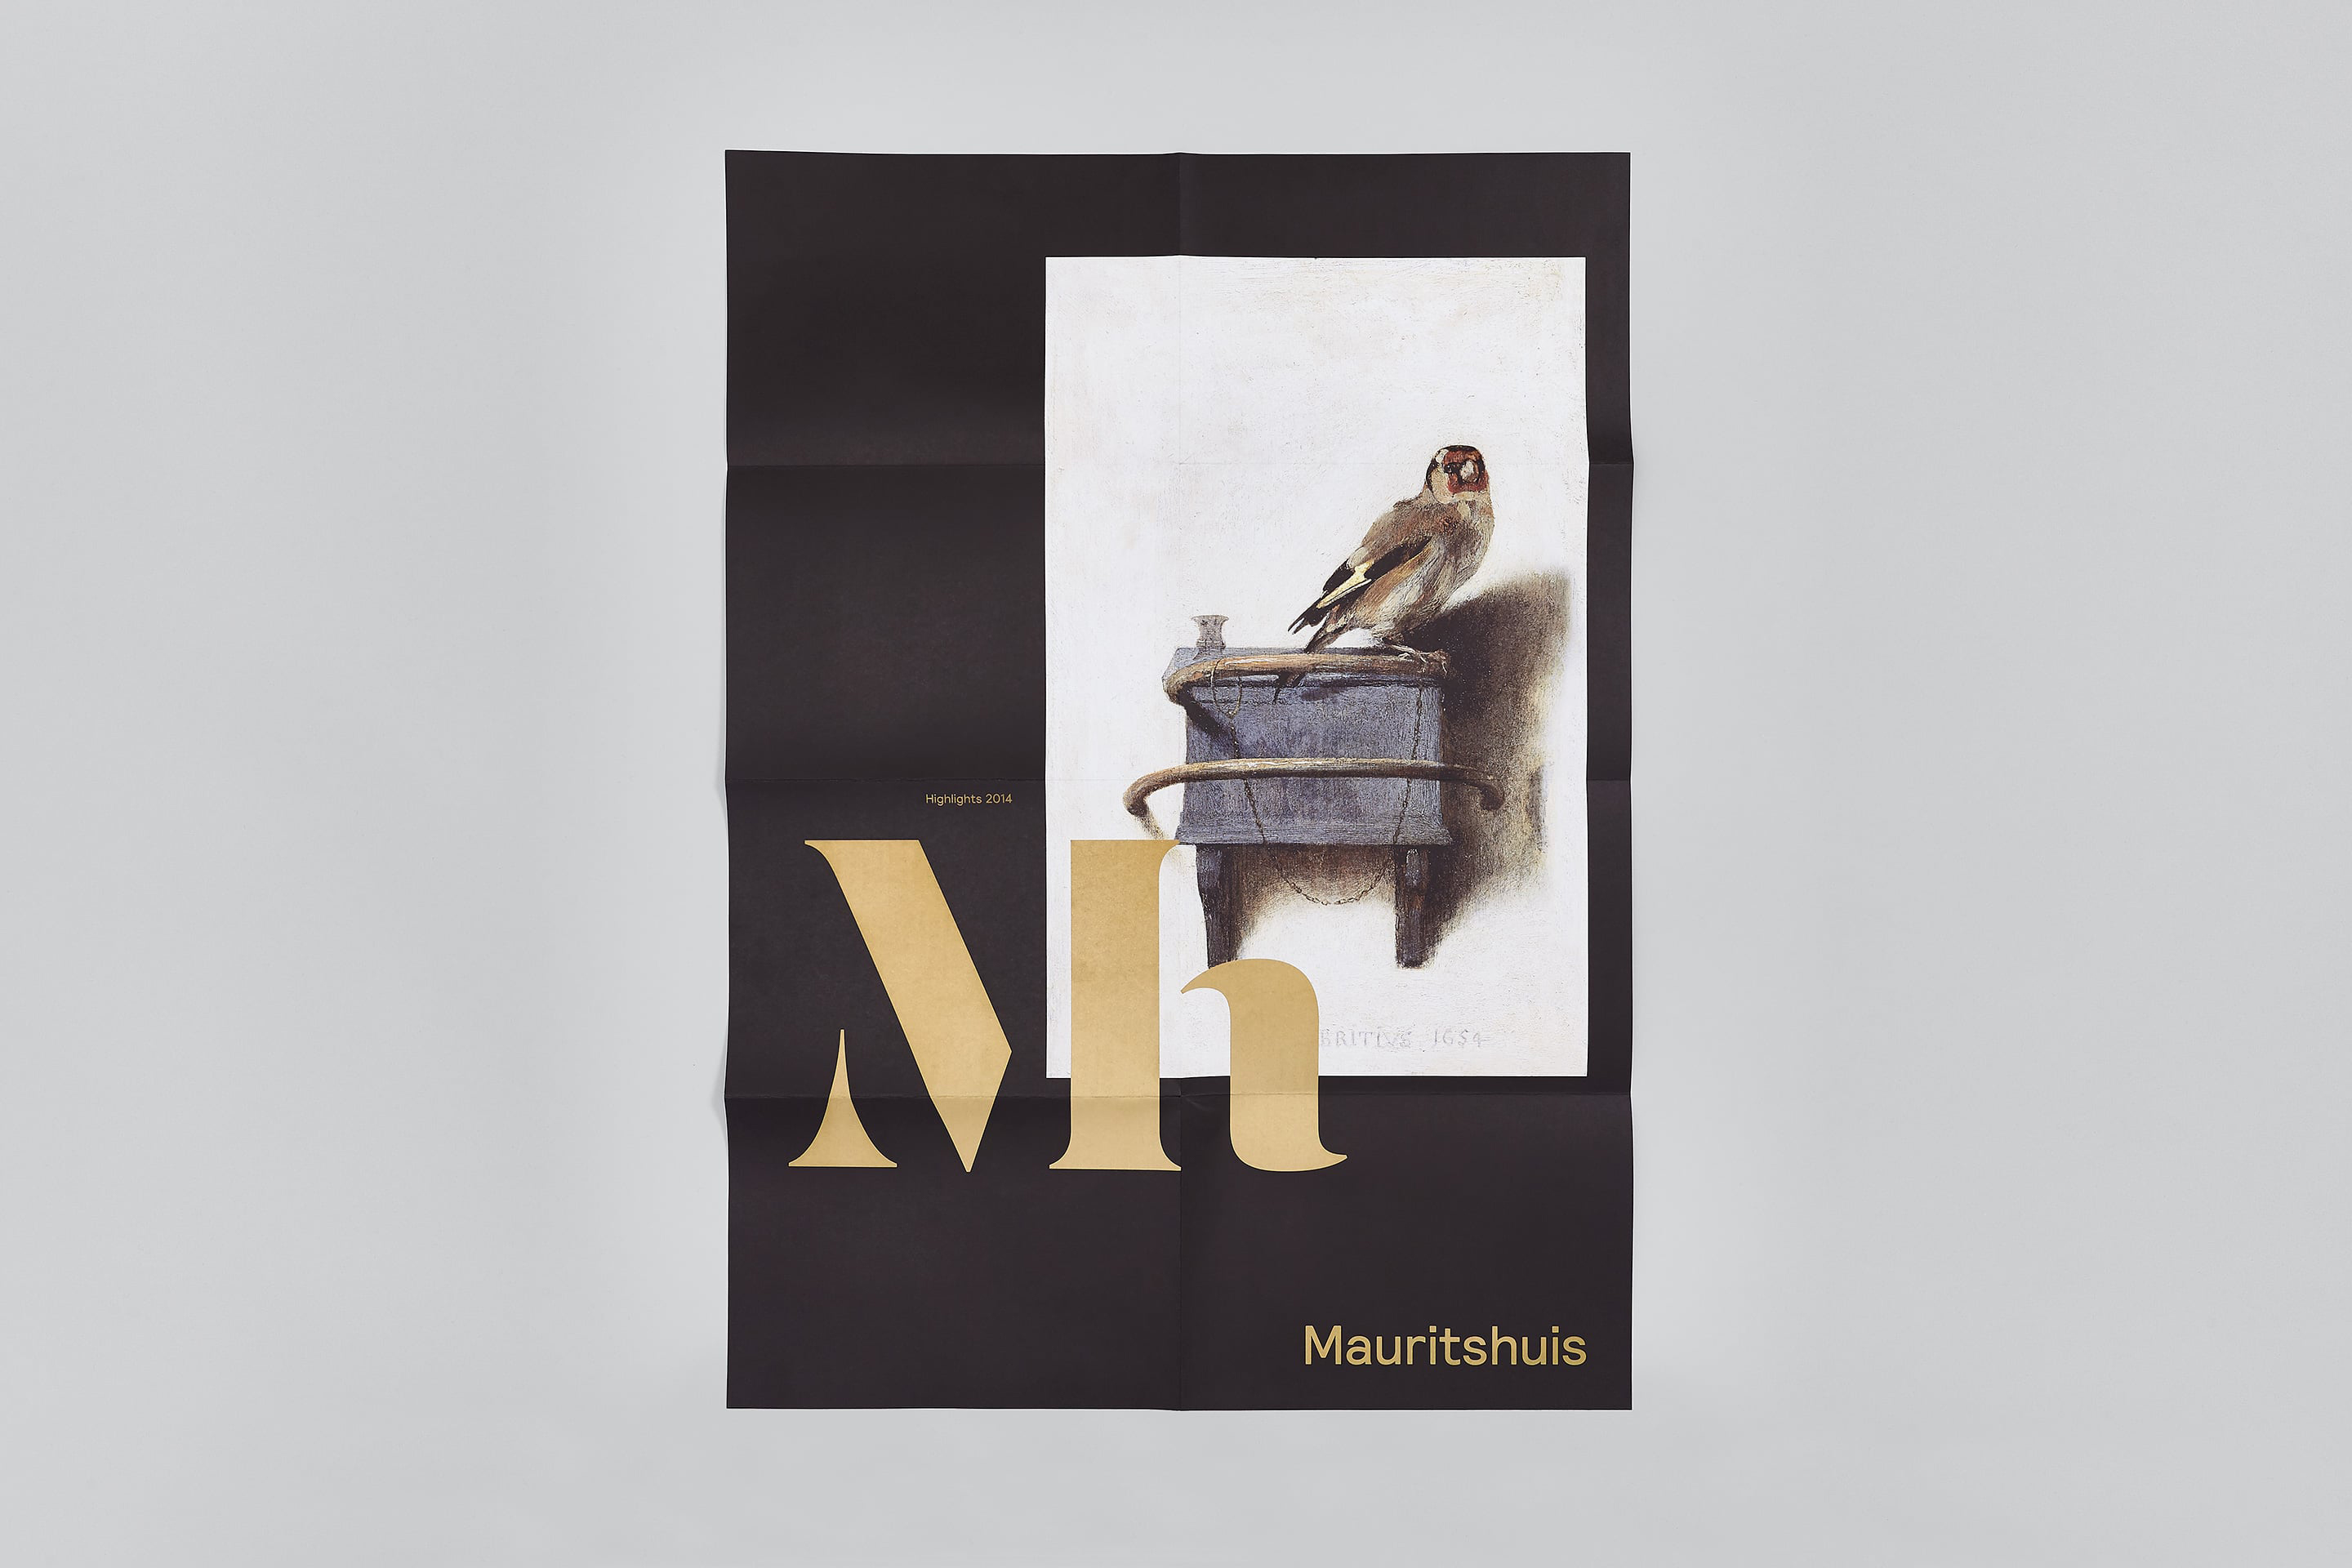 studio dumbar design visual brand identity for Mauritshuis Royal Picture Gallery poster design the gold finch monogram logo design